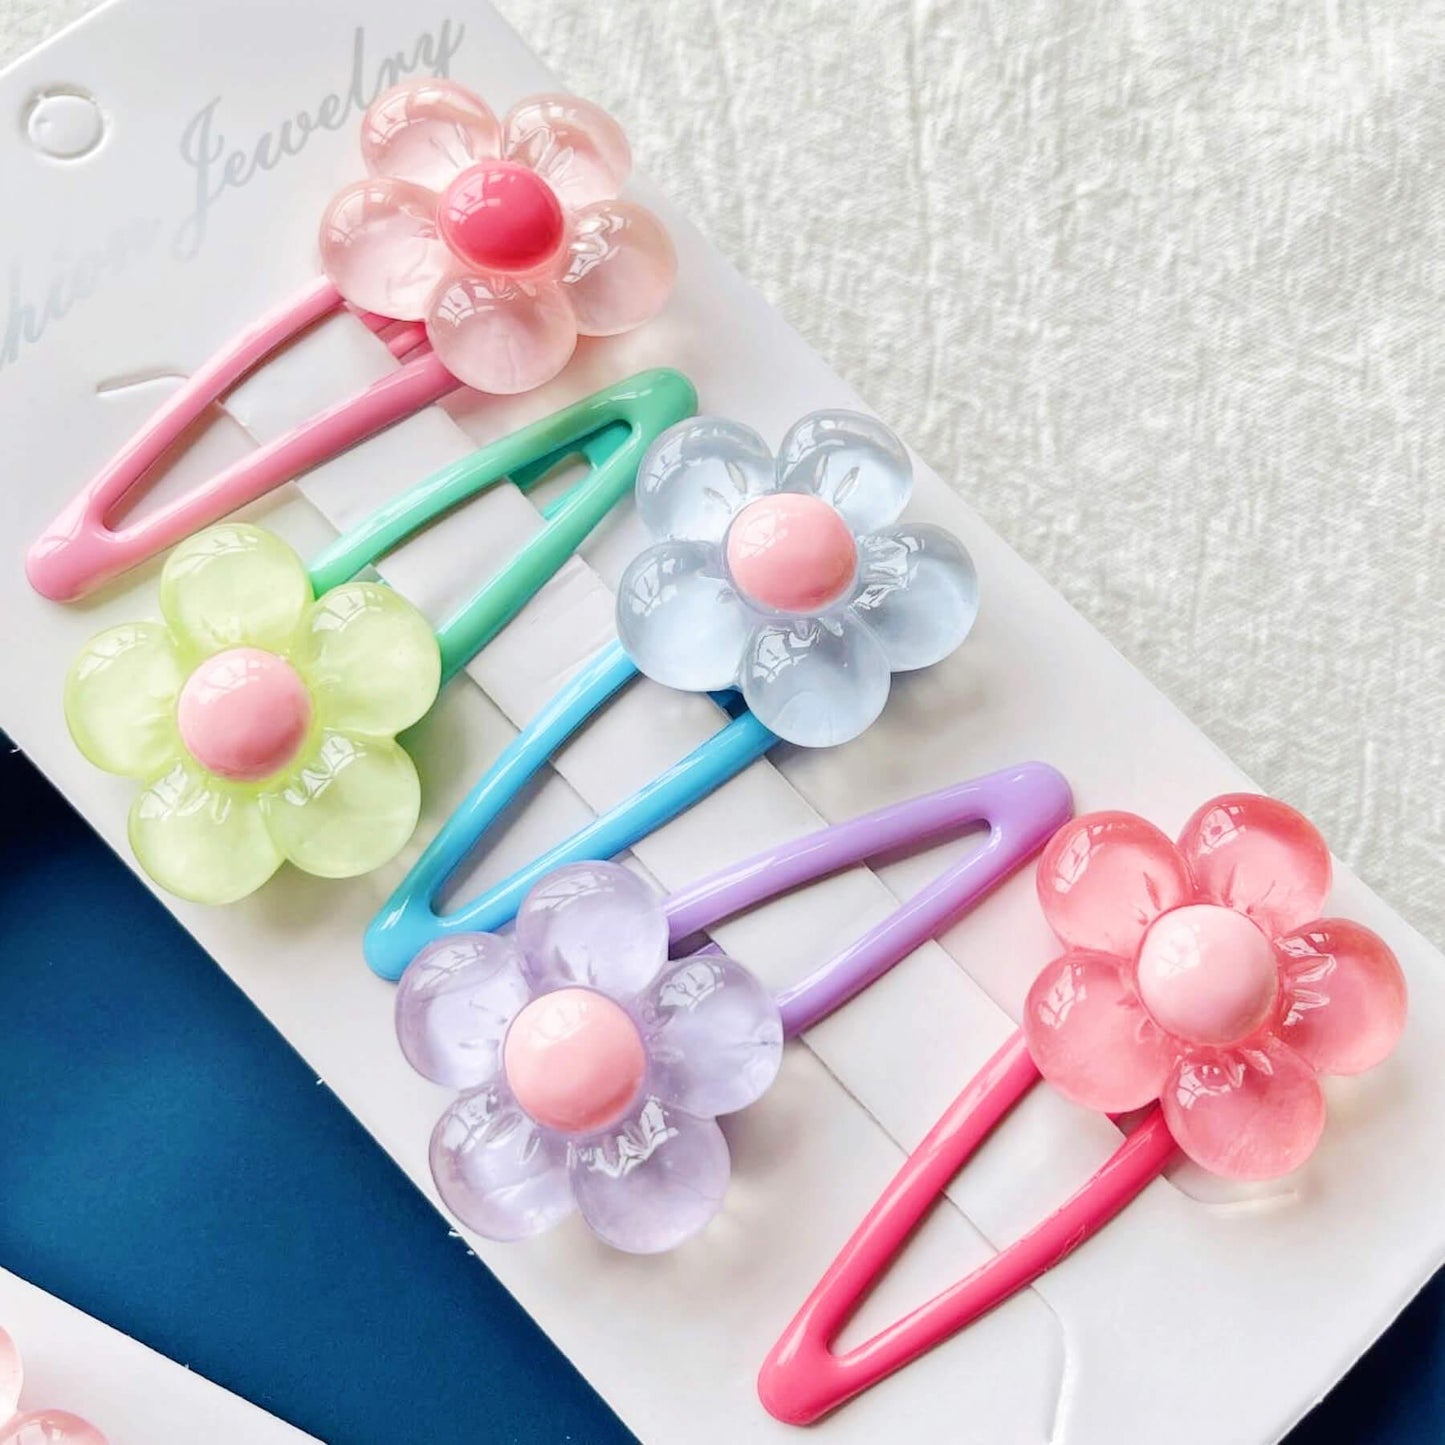 [AUTUMN SALE] 5 Pack Cherry Blossom Flowers Hair Clips - Belle Rose Nails